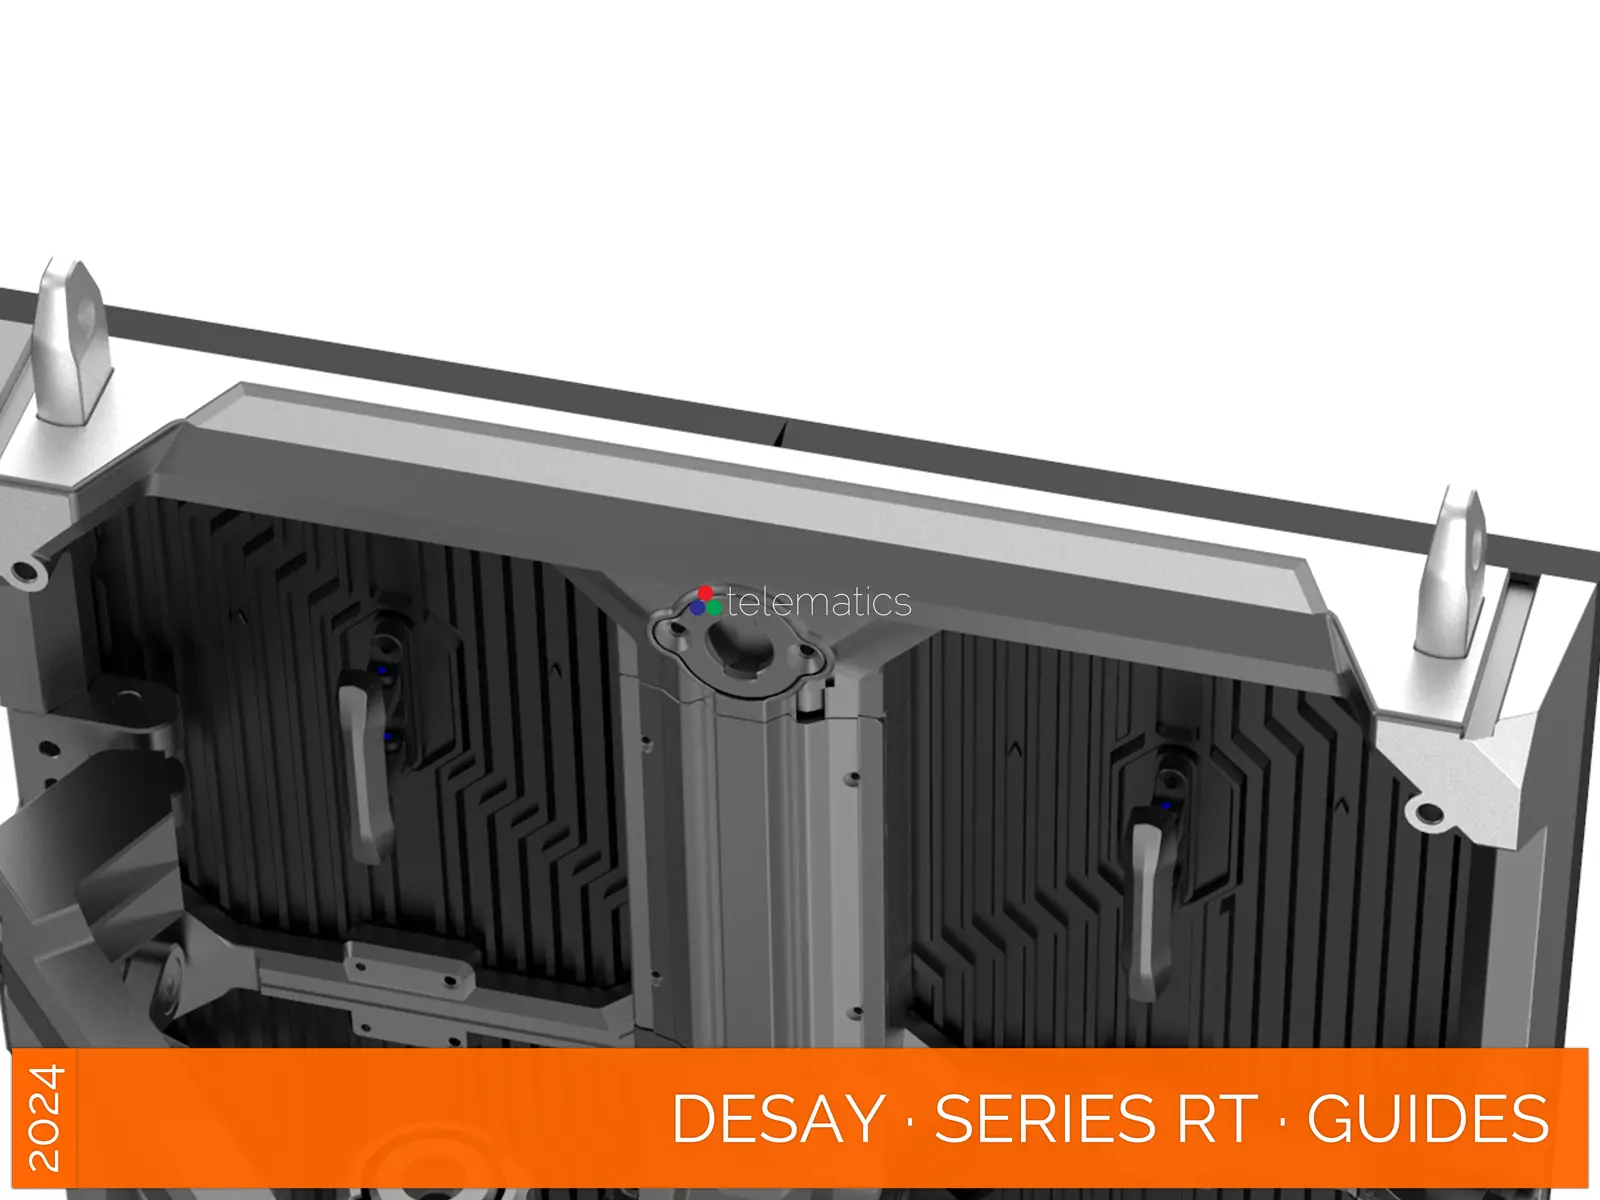 Desay · Series RT · Direct View LED Display Panel · Full Pixel Range · Rental Or Touring · Outdoor Rated · Rapid Service And Setup · Robust Panel Guides For Fast Setup · NovaStar COEX MX CX · Vision Management Platform · Viplex · review · price · cost · priced from $1,790 per square meter